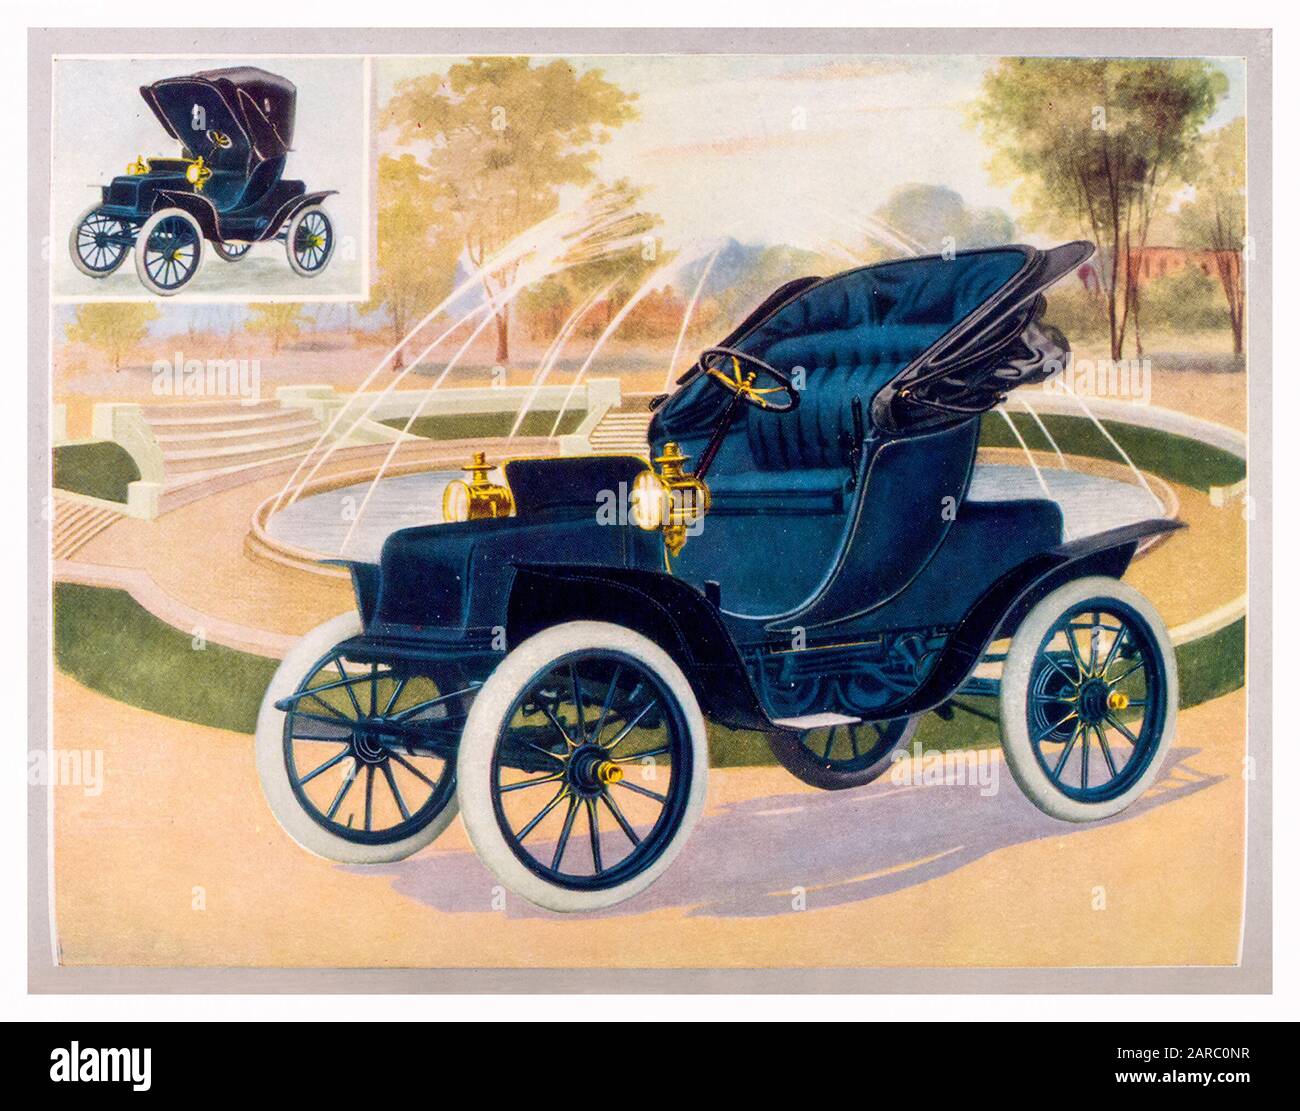 Early, Electric Car, Vintage Car, Model 6 Victoria phaeton, Price $1800, by Babcock Electrics, illustration 1909 Stock Photo